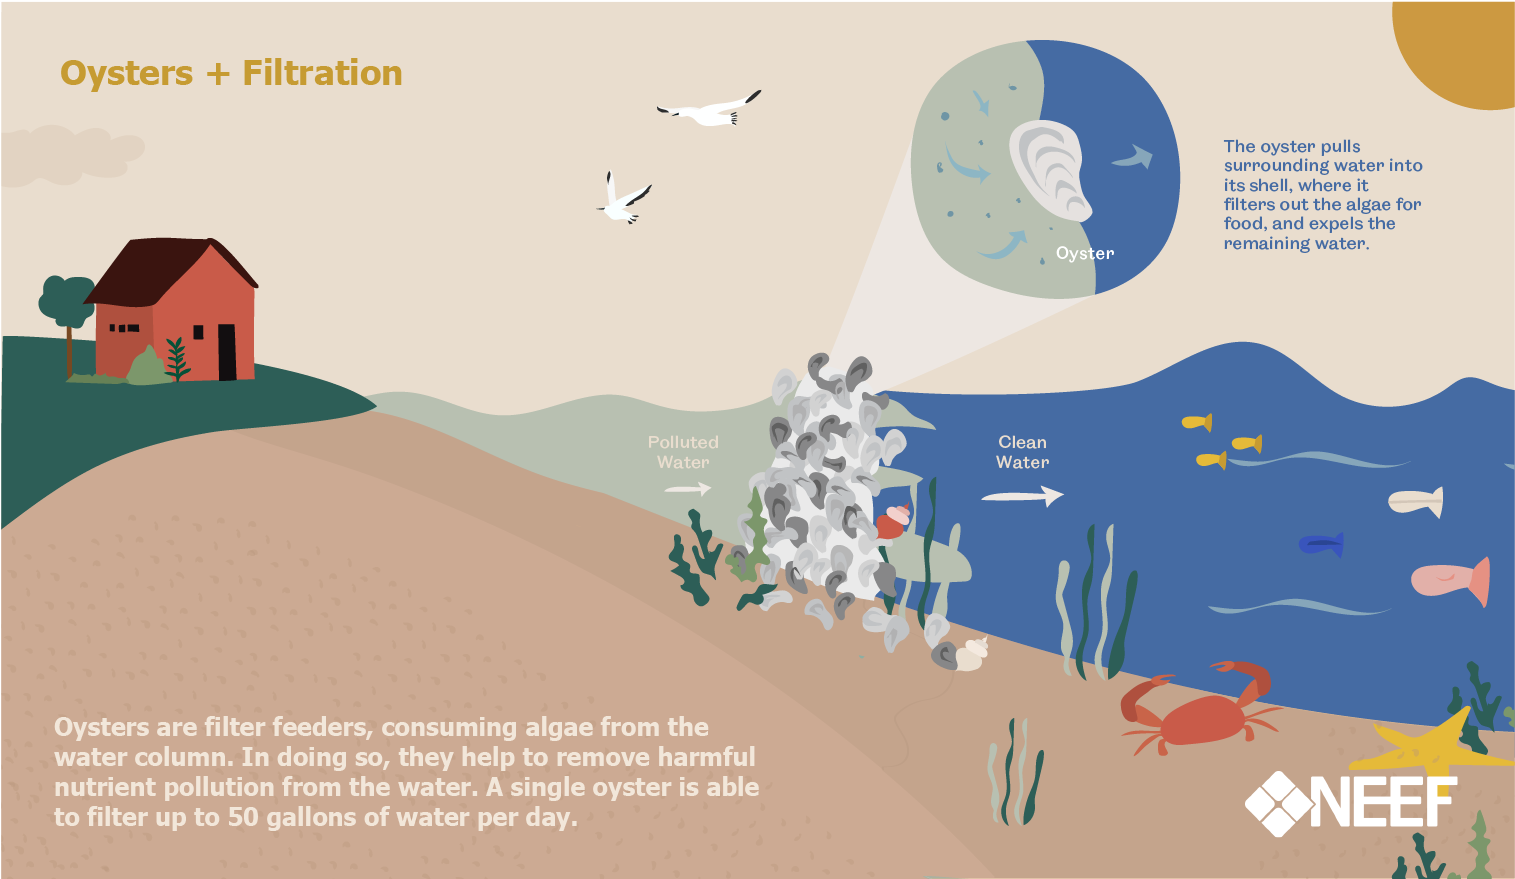 This infographic illustrates how oysters are able to filter polluted water.